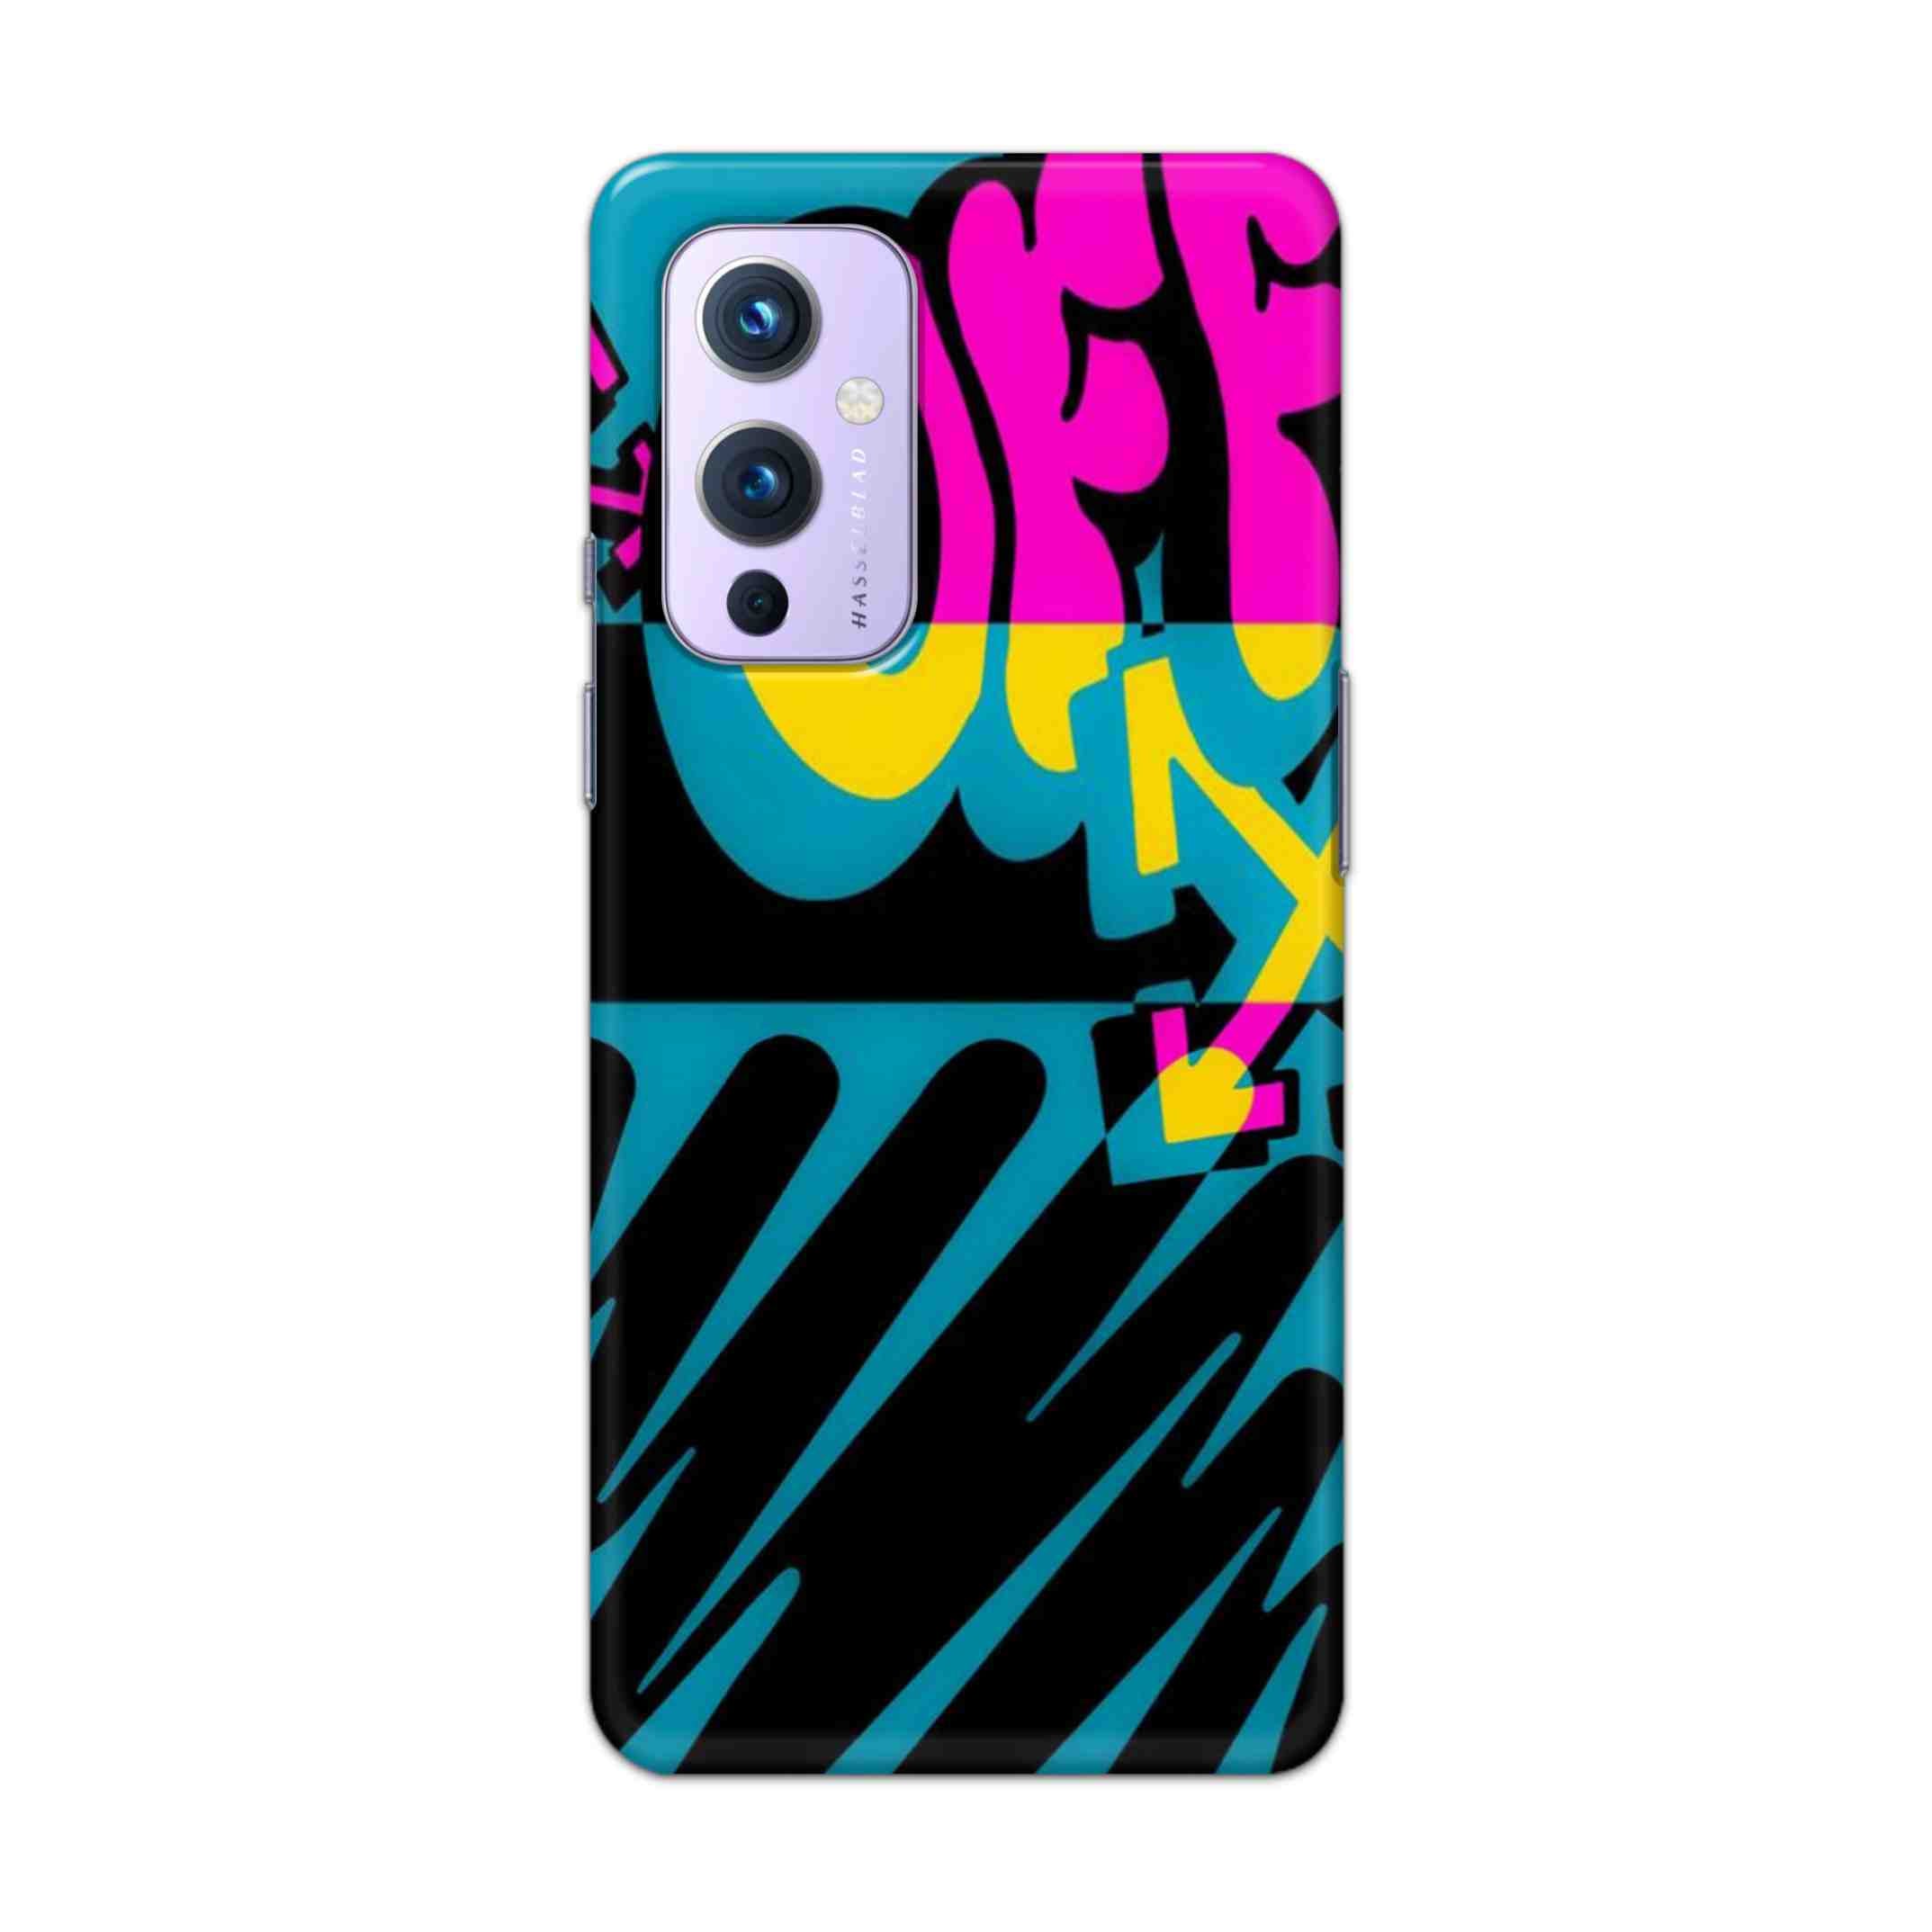 Buy Off Hard Back Mobile Phone Case Cover For OnePlus 9 Online